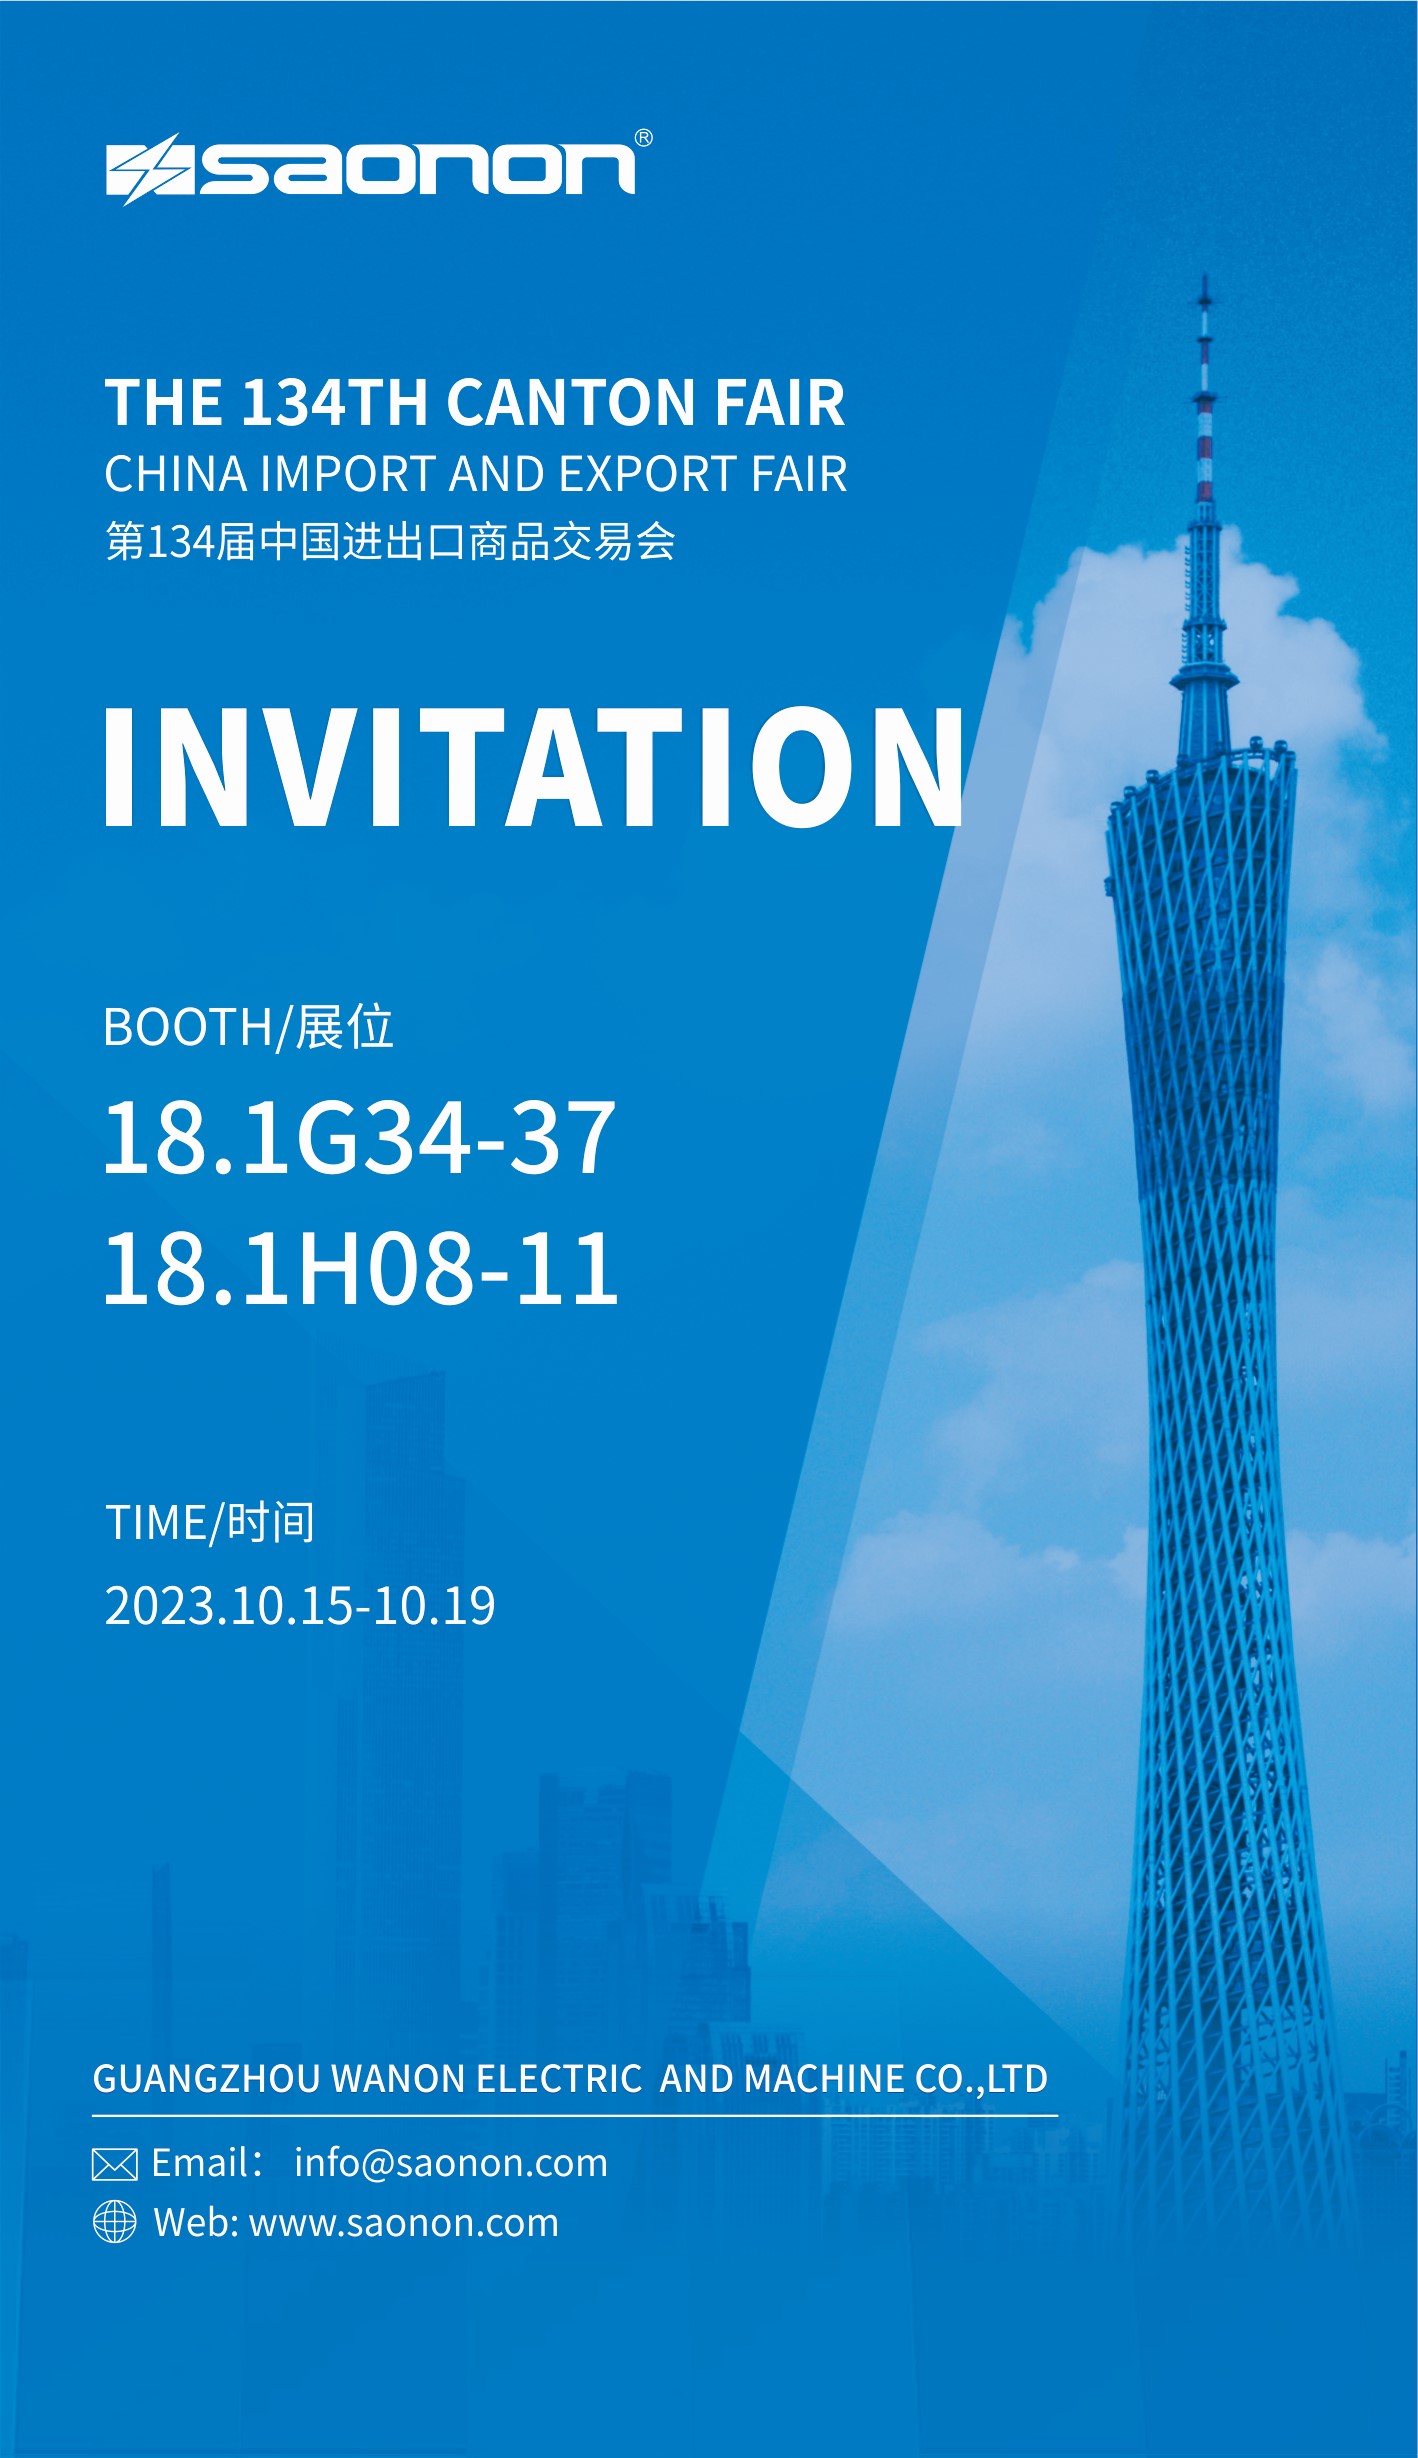 Waiting for you at the 134th Canton Fair！